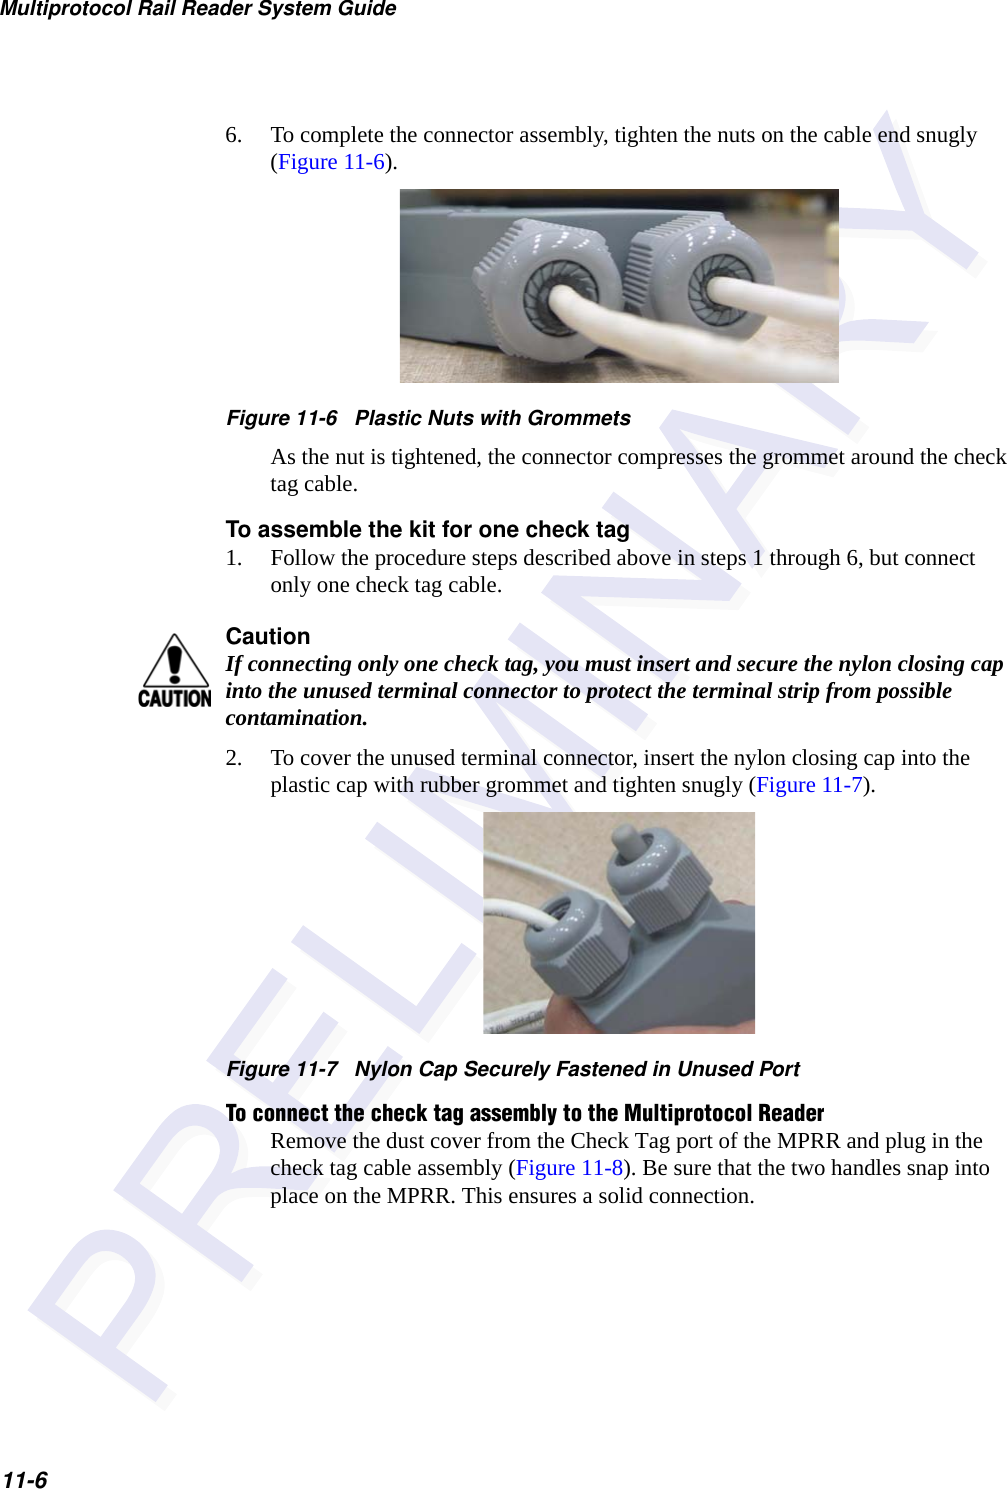 Multiprotocol Rail Reader System Guide11-66. To complete the connector assembly, tighten the nuts on the cable end snugly (Figure 11-6).Figure 11-6   Plastic Nuts with GrommetsAs the nut is tightened, the connector compresses the grommet around the check tag cable.To assemble the kit for one check tag1. Follow the procedure steps described above in steps 1 through 6, but connect only one check tag cable.CautionIf connecting only one check tag, you must insert and secure the nylon closing cap into the unused terminal connector to protect the terminal strip from possible contamination.2. To cover the unused terminal connector, insert the nylon closing cap into the plastic cap with rubber grommet and tighten snugly (Figure 11-7).Figure 11-7   Nylon Cap Securely Fastened in Unused PortTo connect the check tag assembly to the Multiprotocol ReaderRemove the dust cover from the Check Tag port of the MPRR and plug in the check tag cable assembly (Figure 11-8). Be sure that the two handles snap into place on the MPRR. This ensures a solid connection.